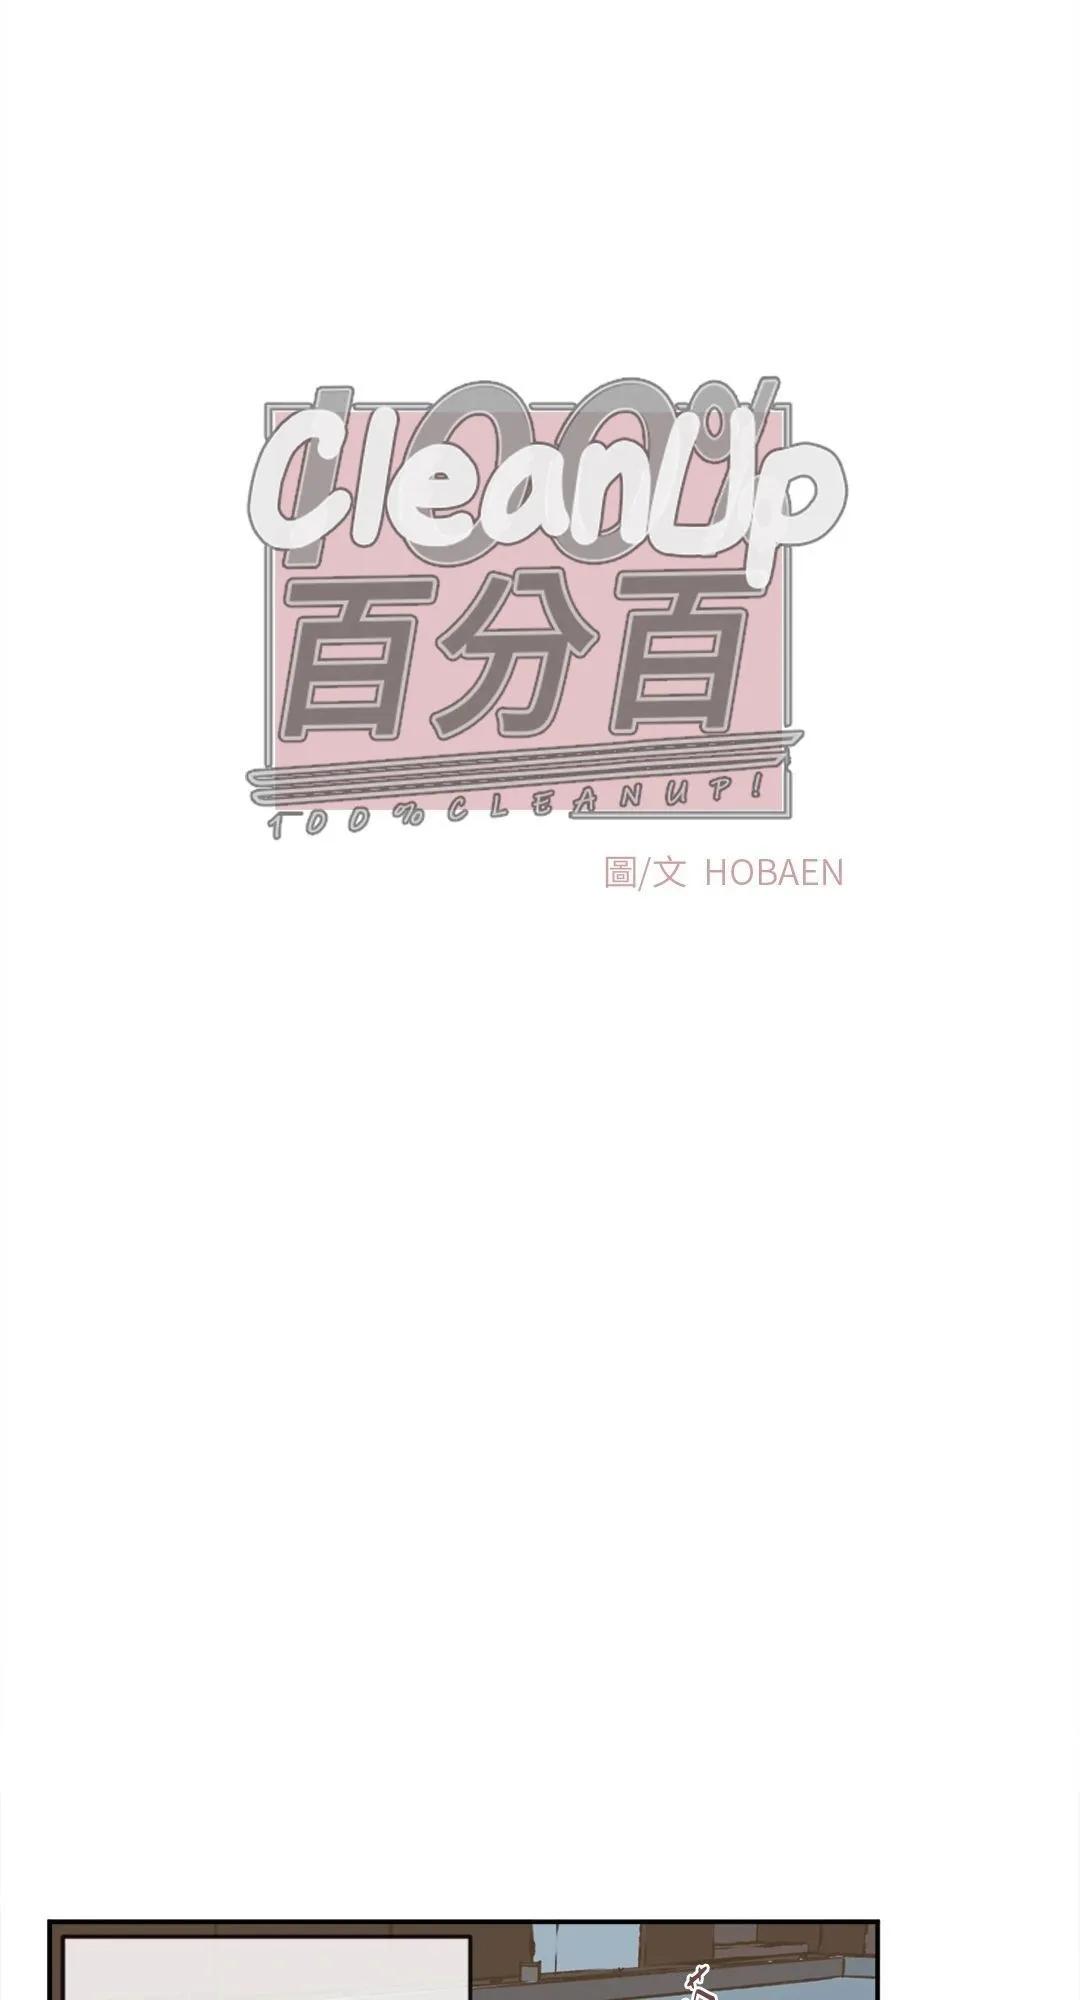 Clean Up百分百 - 第29话 - 3